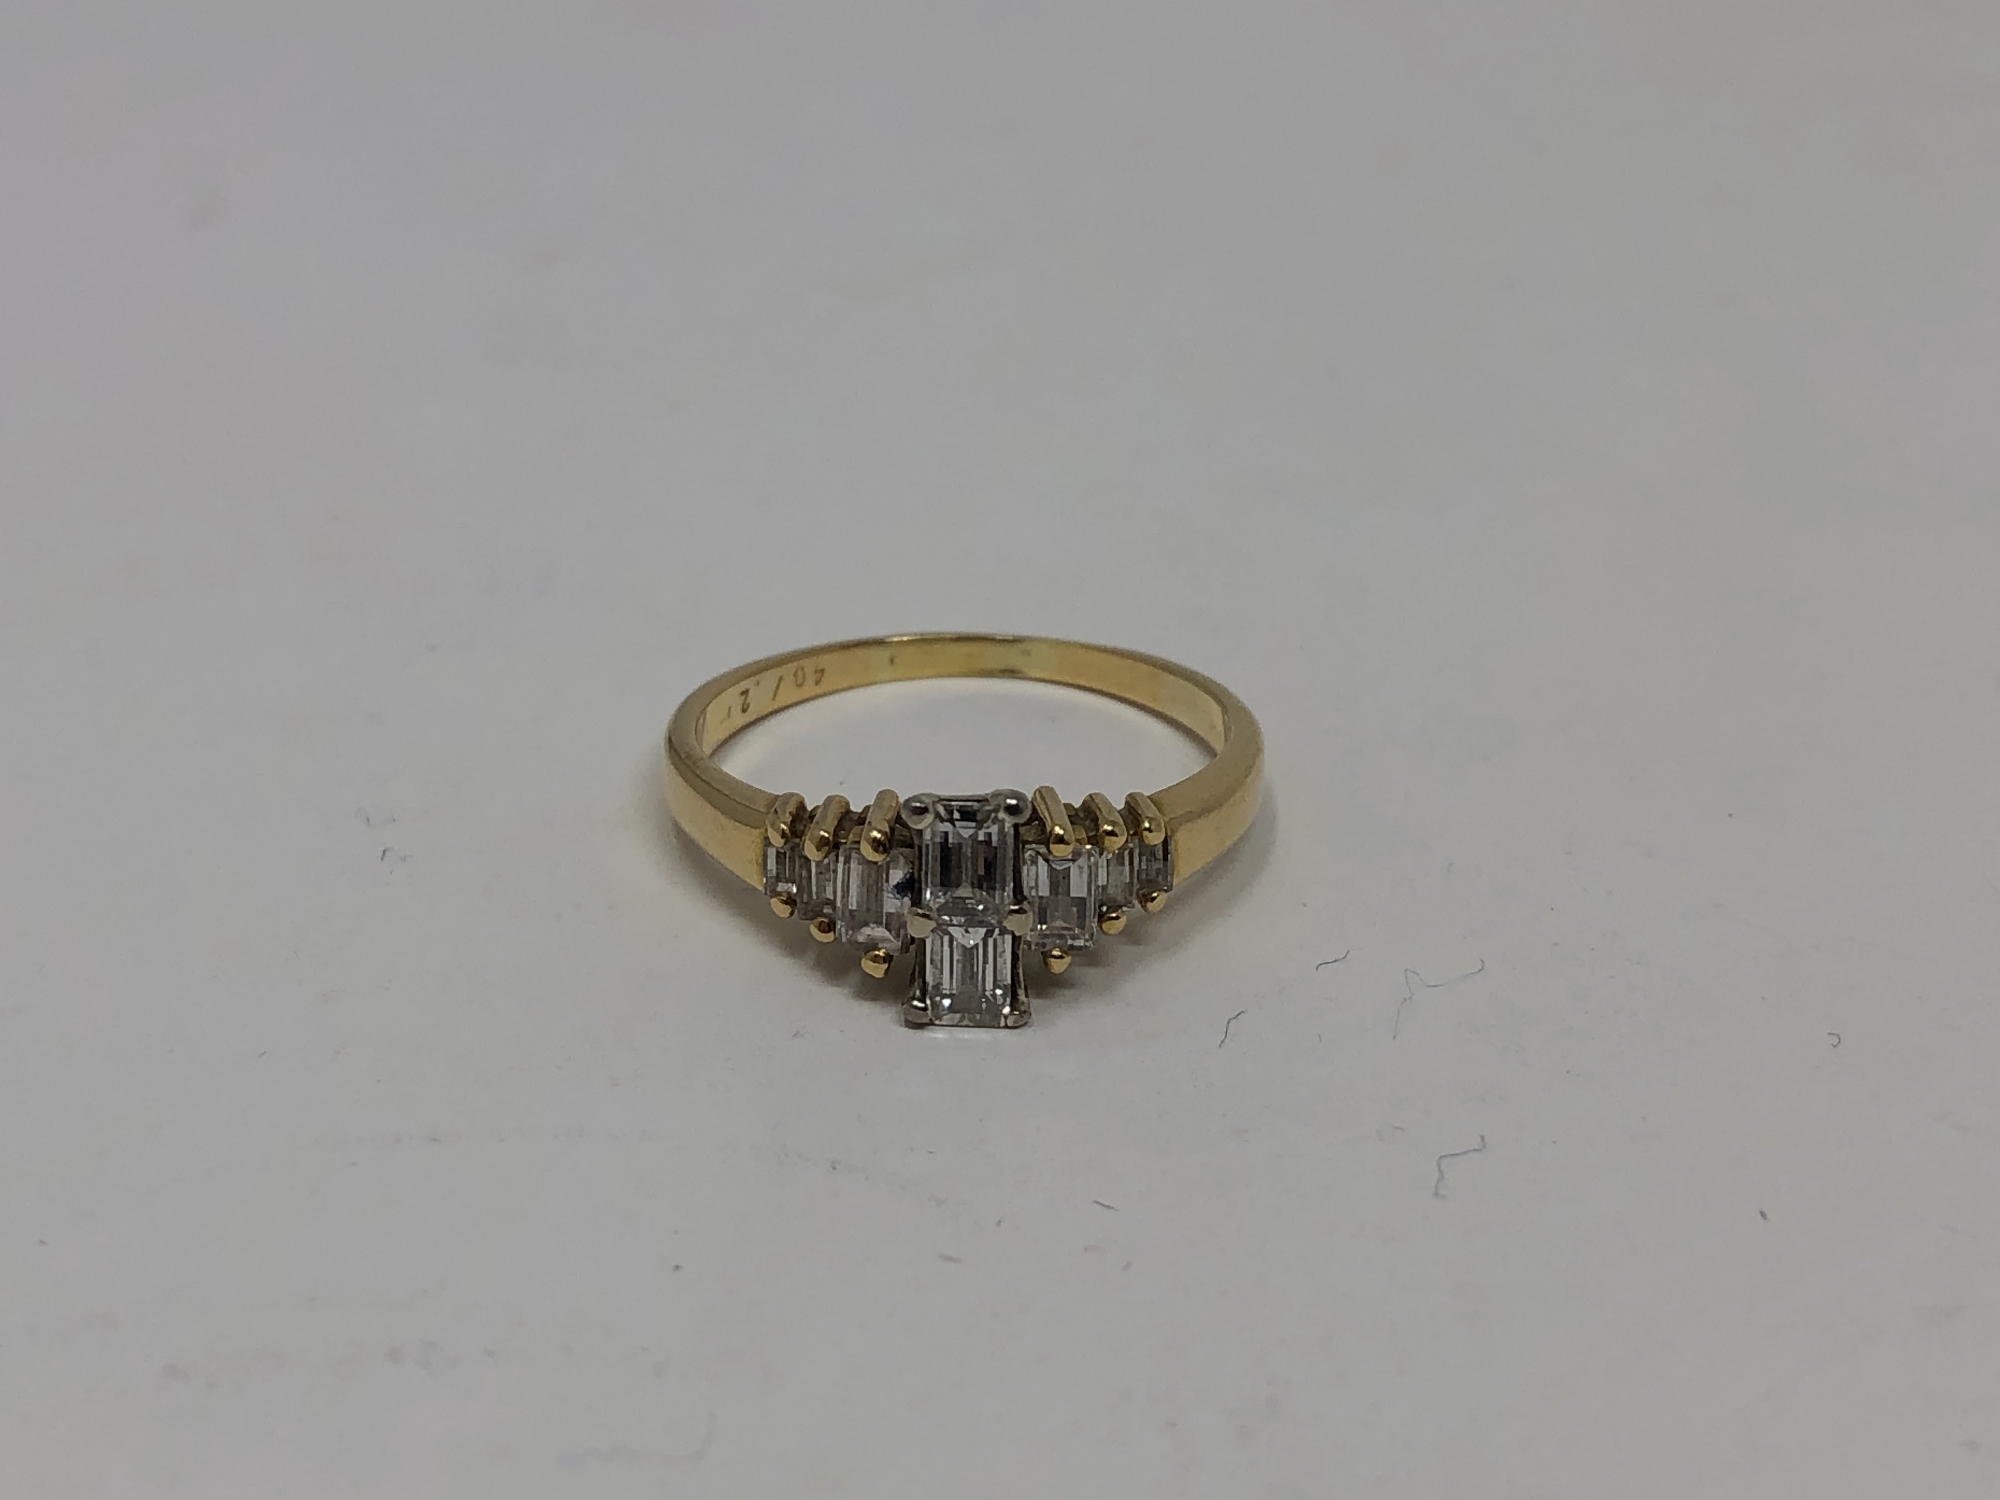 A yellow gold millennium cut diamond ring, the two largest stones G/H colour, Clarity Vs2,